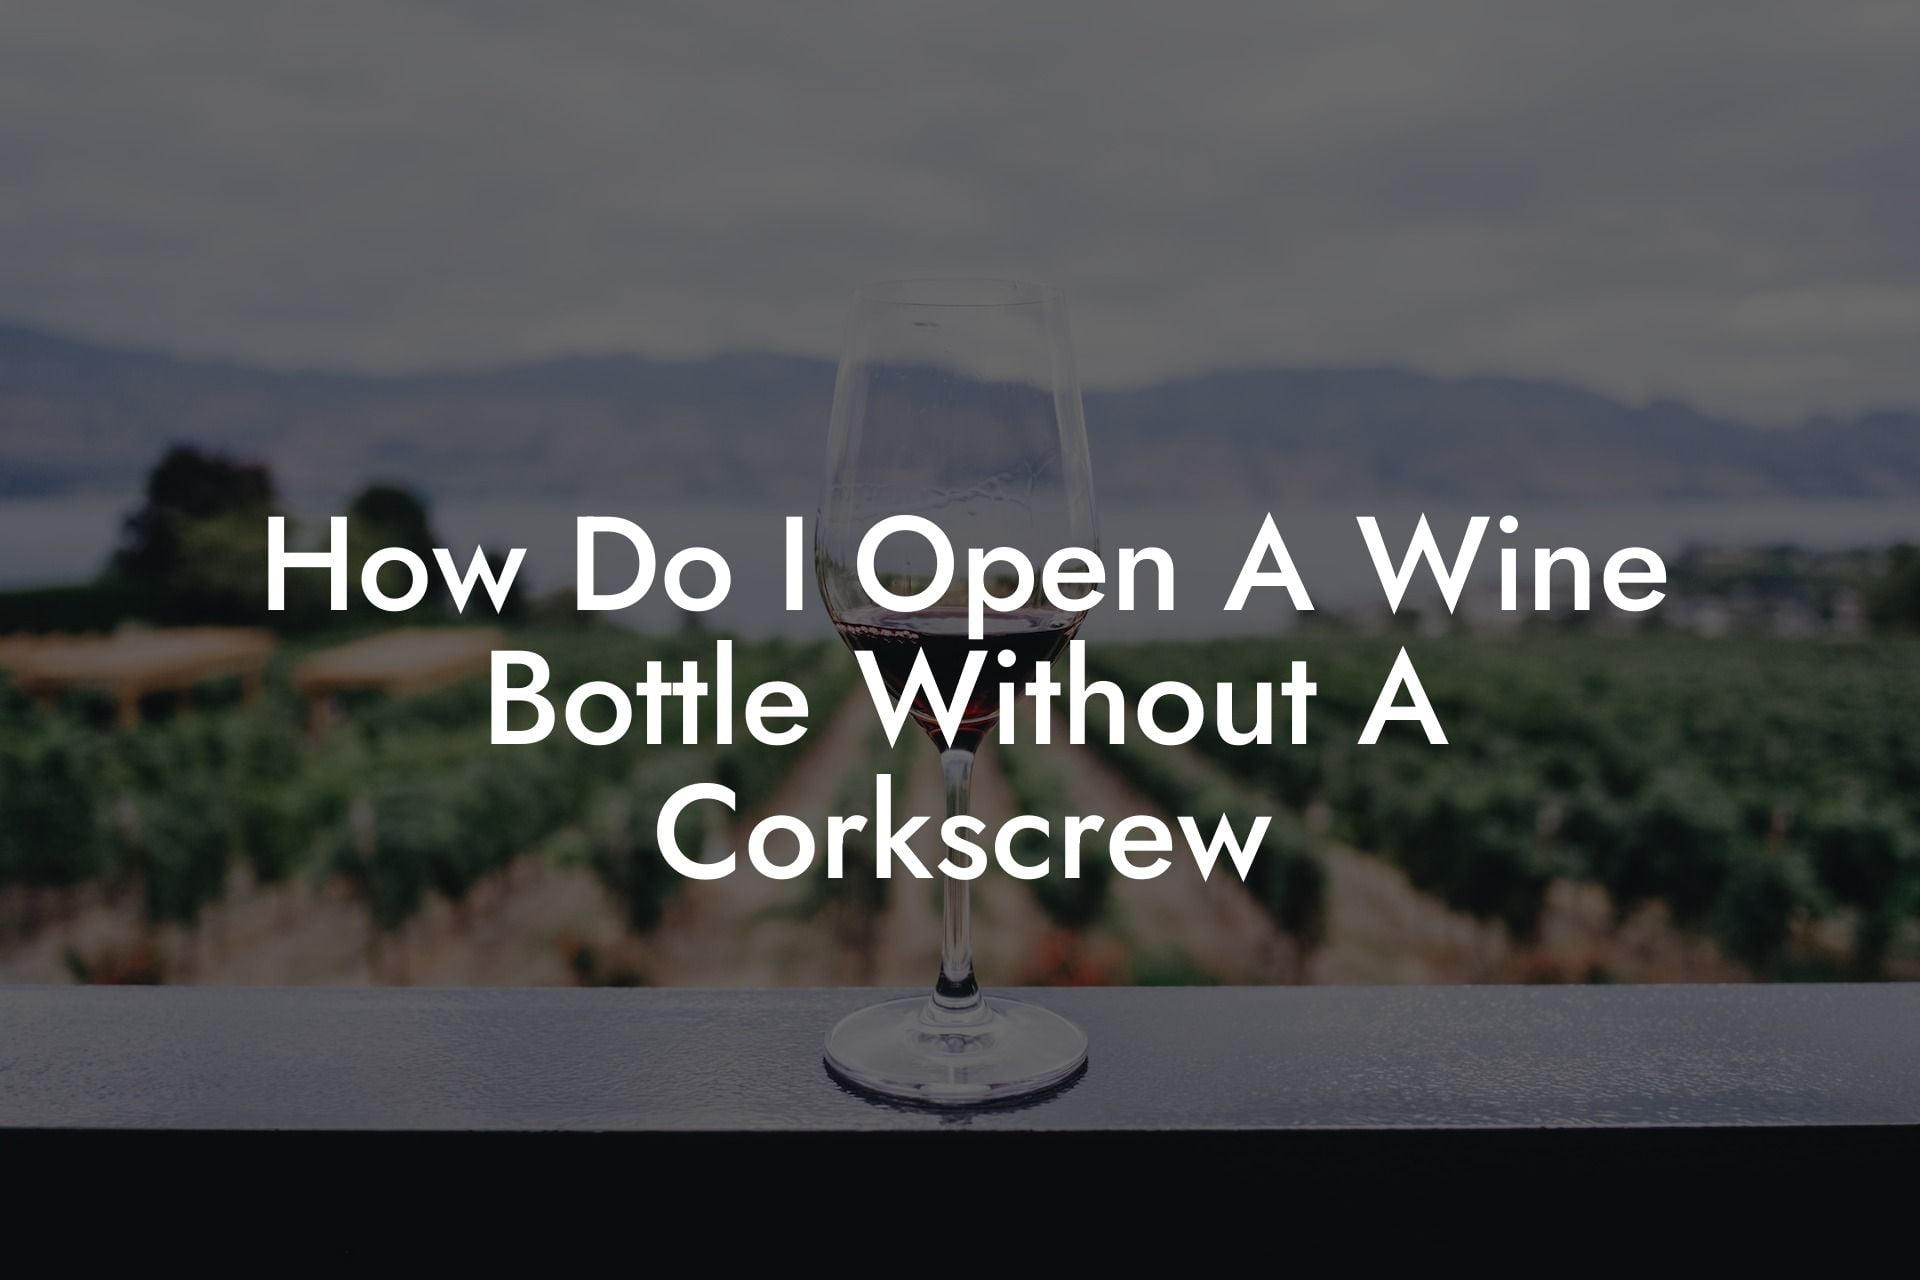 How Do I Open A Wine Bottle Without A Corkscrew